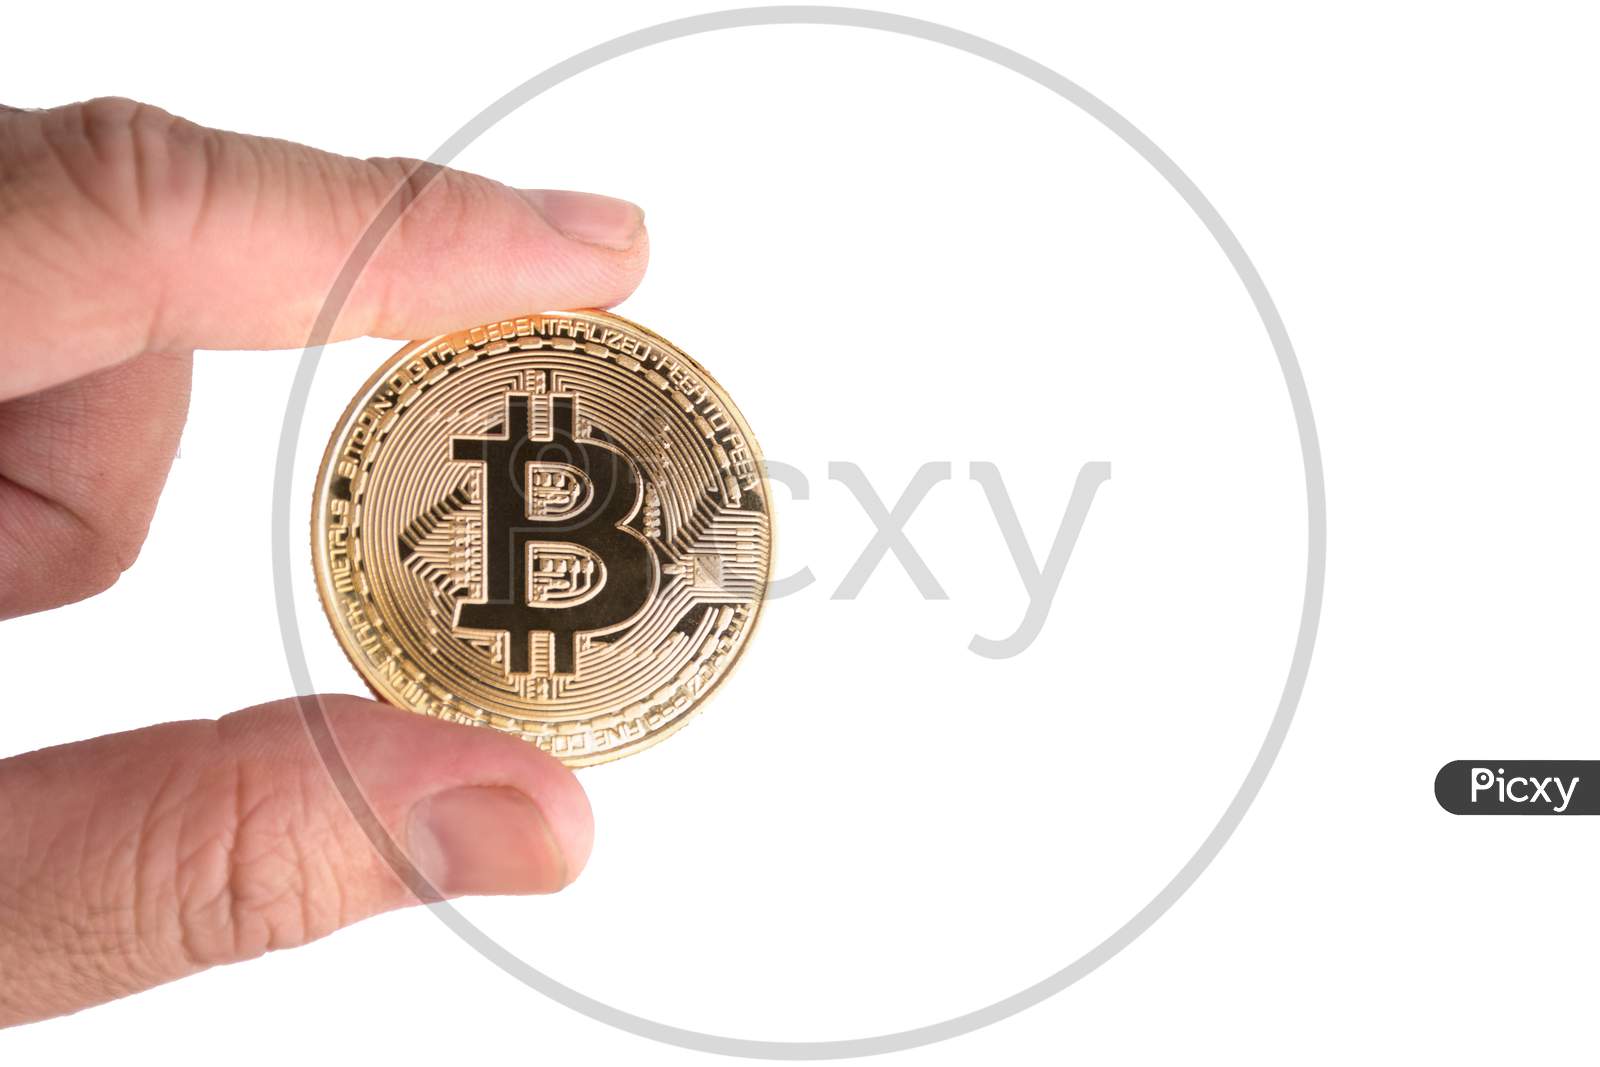 Bitcoin On Isolated White Background. Cryptography And Electronic Money Concept. Currency Trading And Gold Mining Theme. Business And Technology Theme.